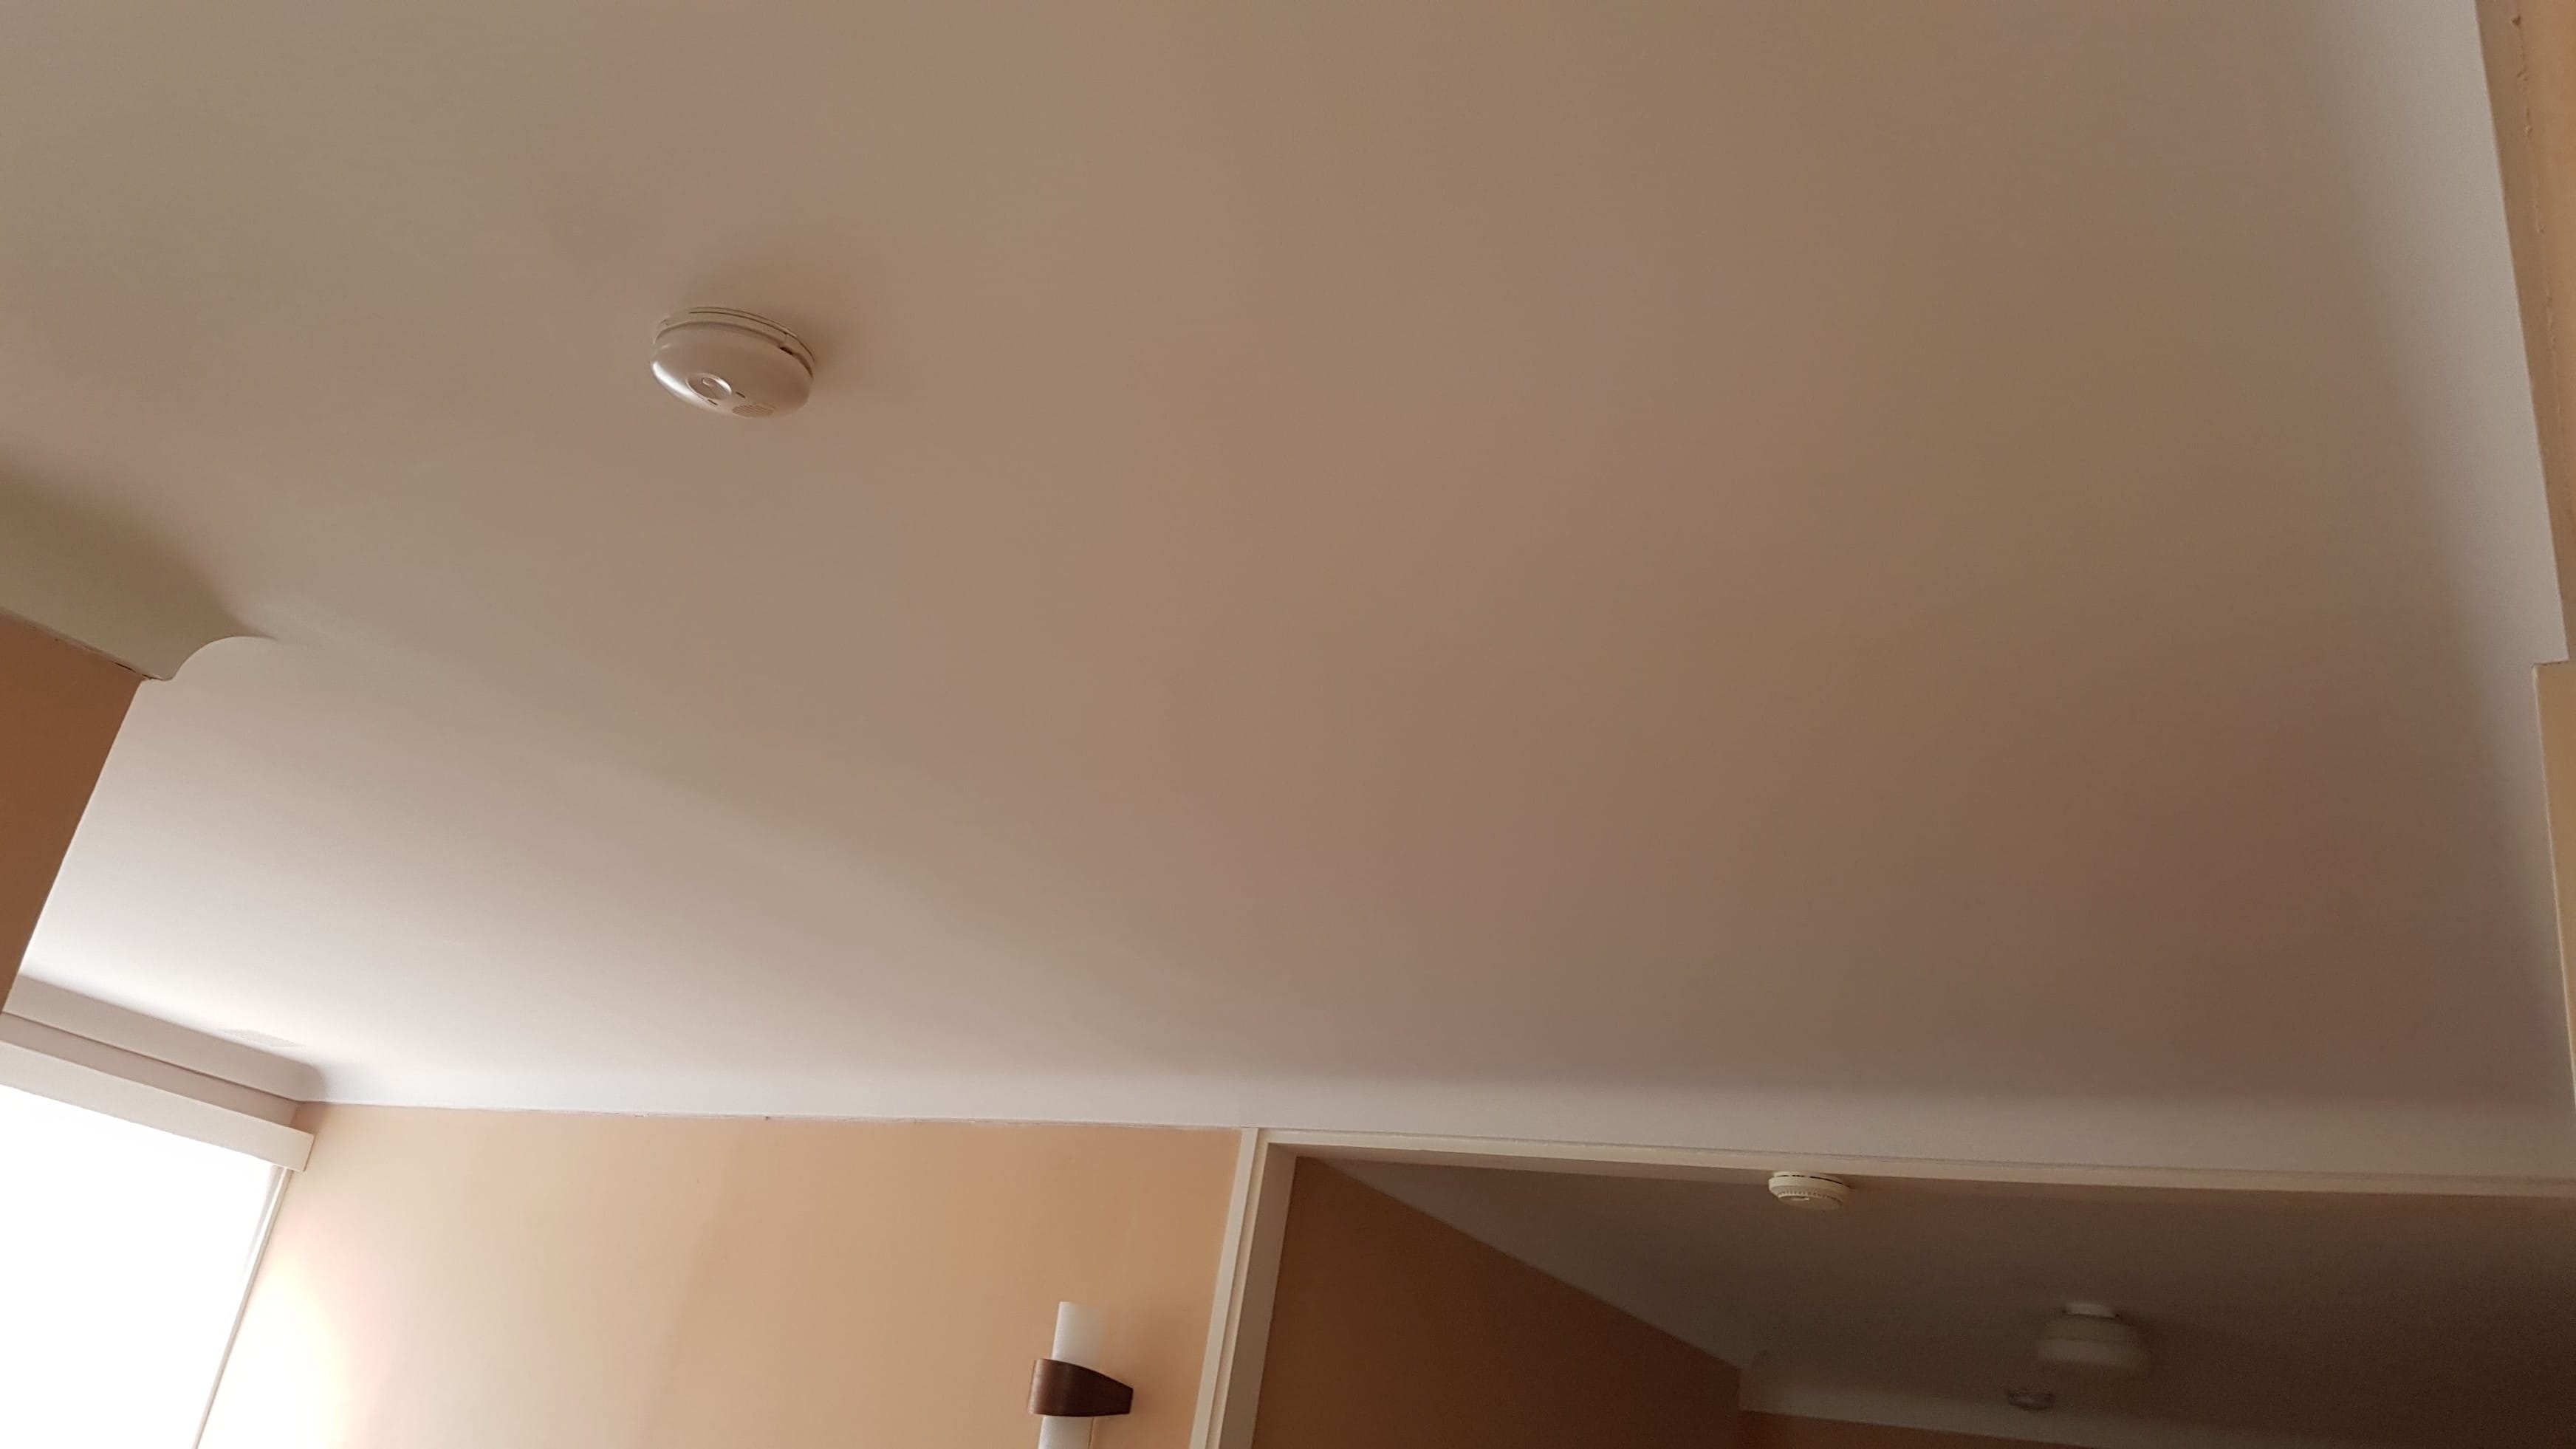 Cracked And Sagging Ceiling Repaired West Coast Ceiling Repairs